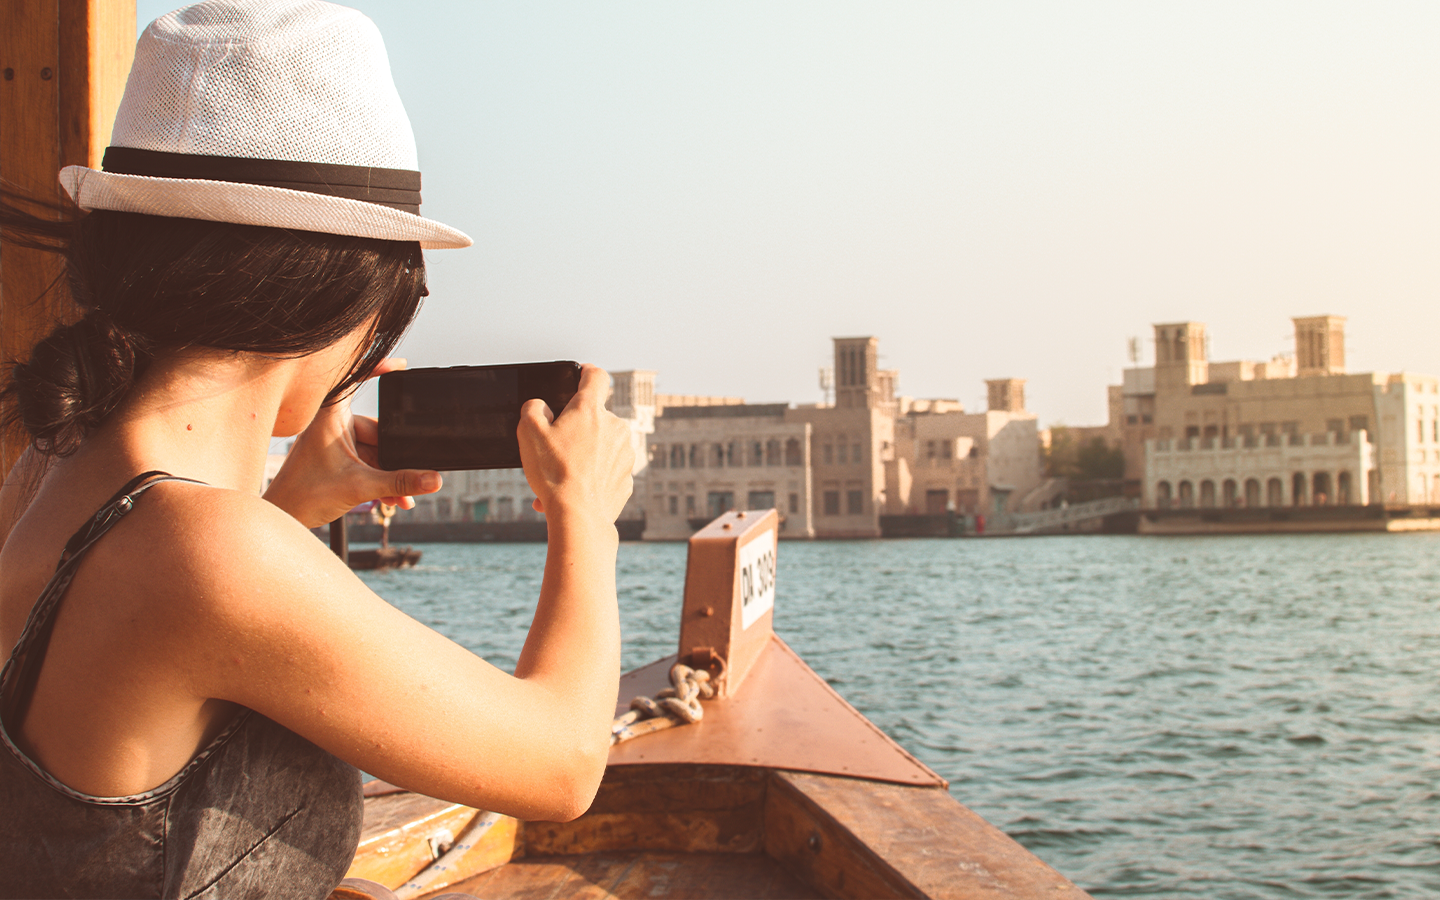 RTA marine transport regulations abstain users from taking photos or videos on stations